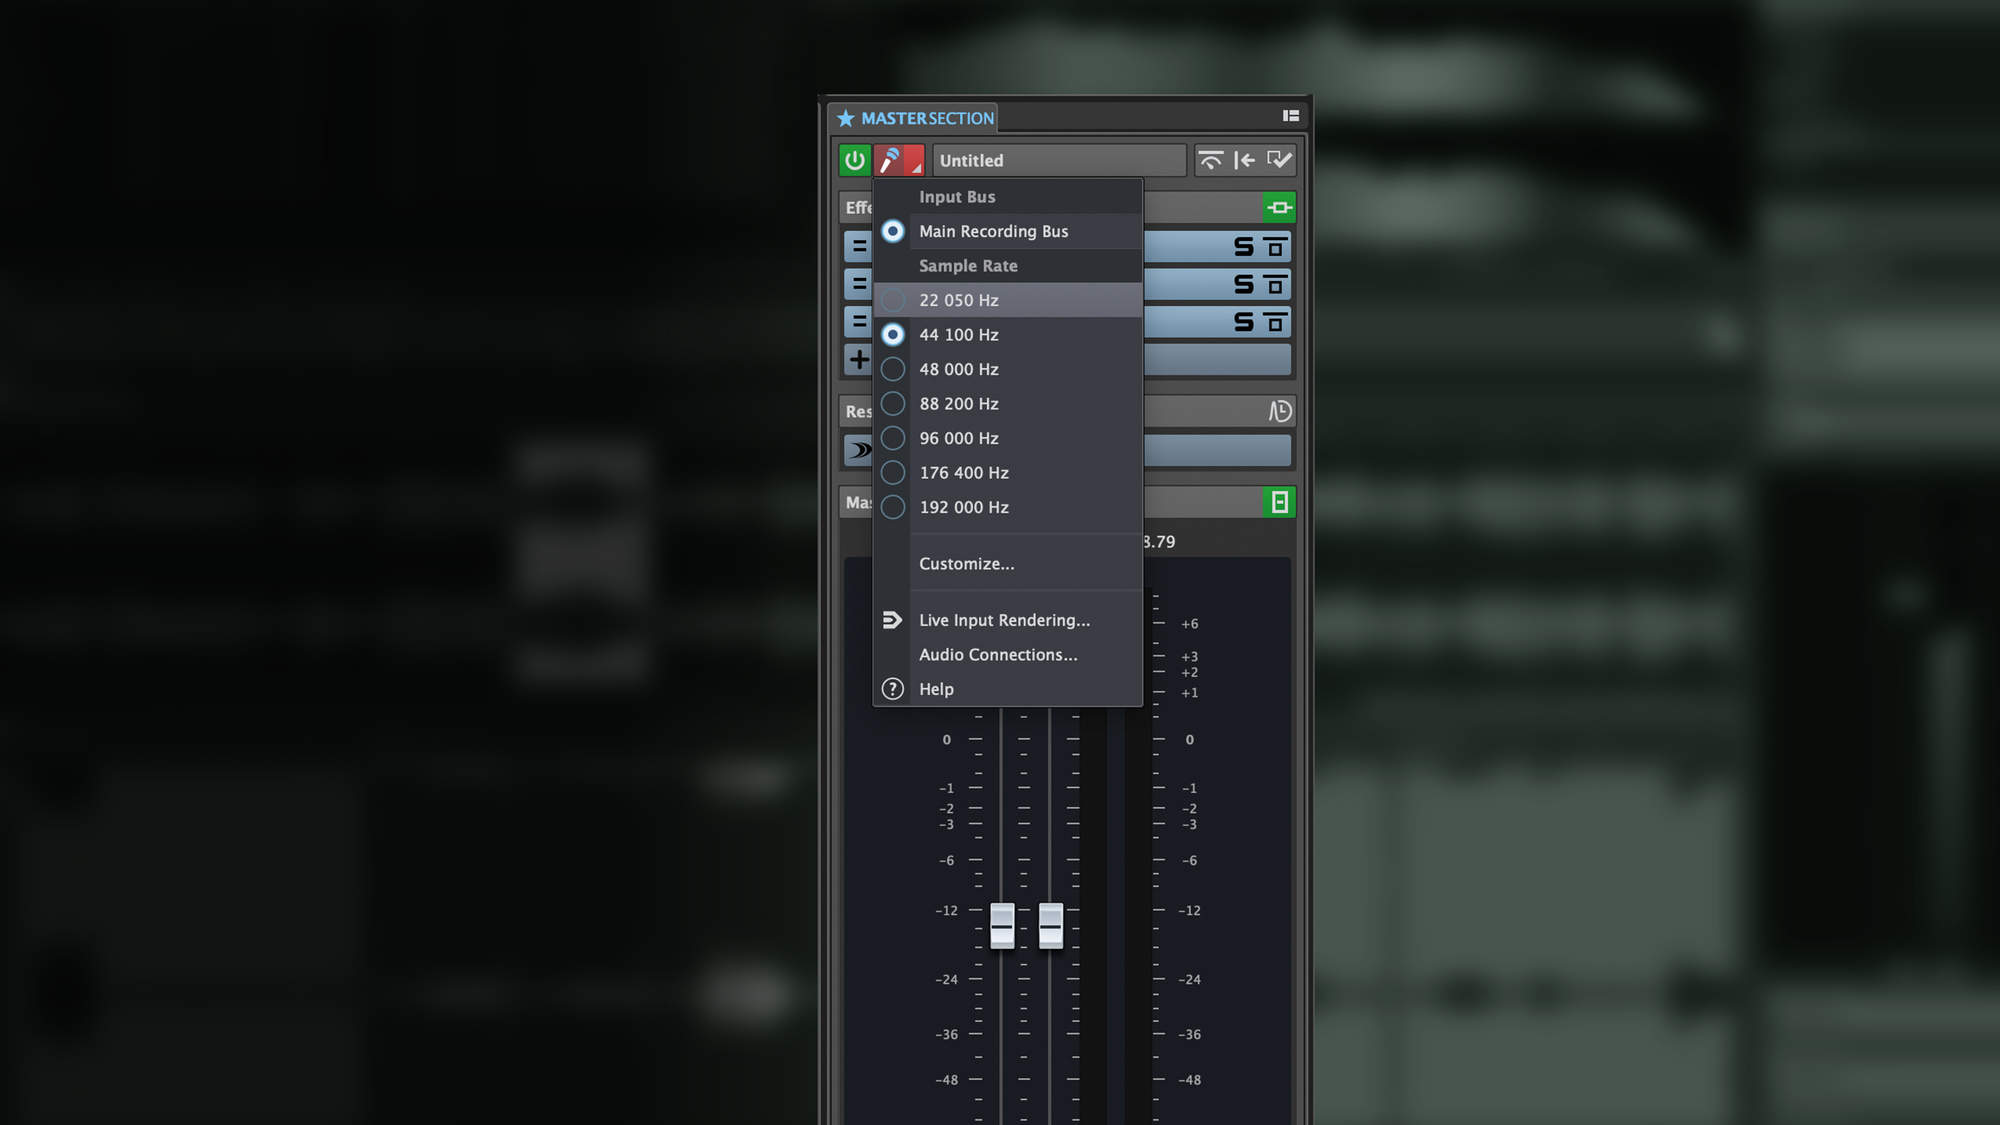 View Sample Rate Izotope Rx